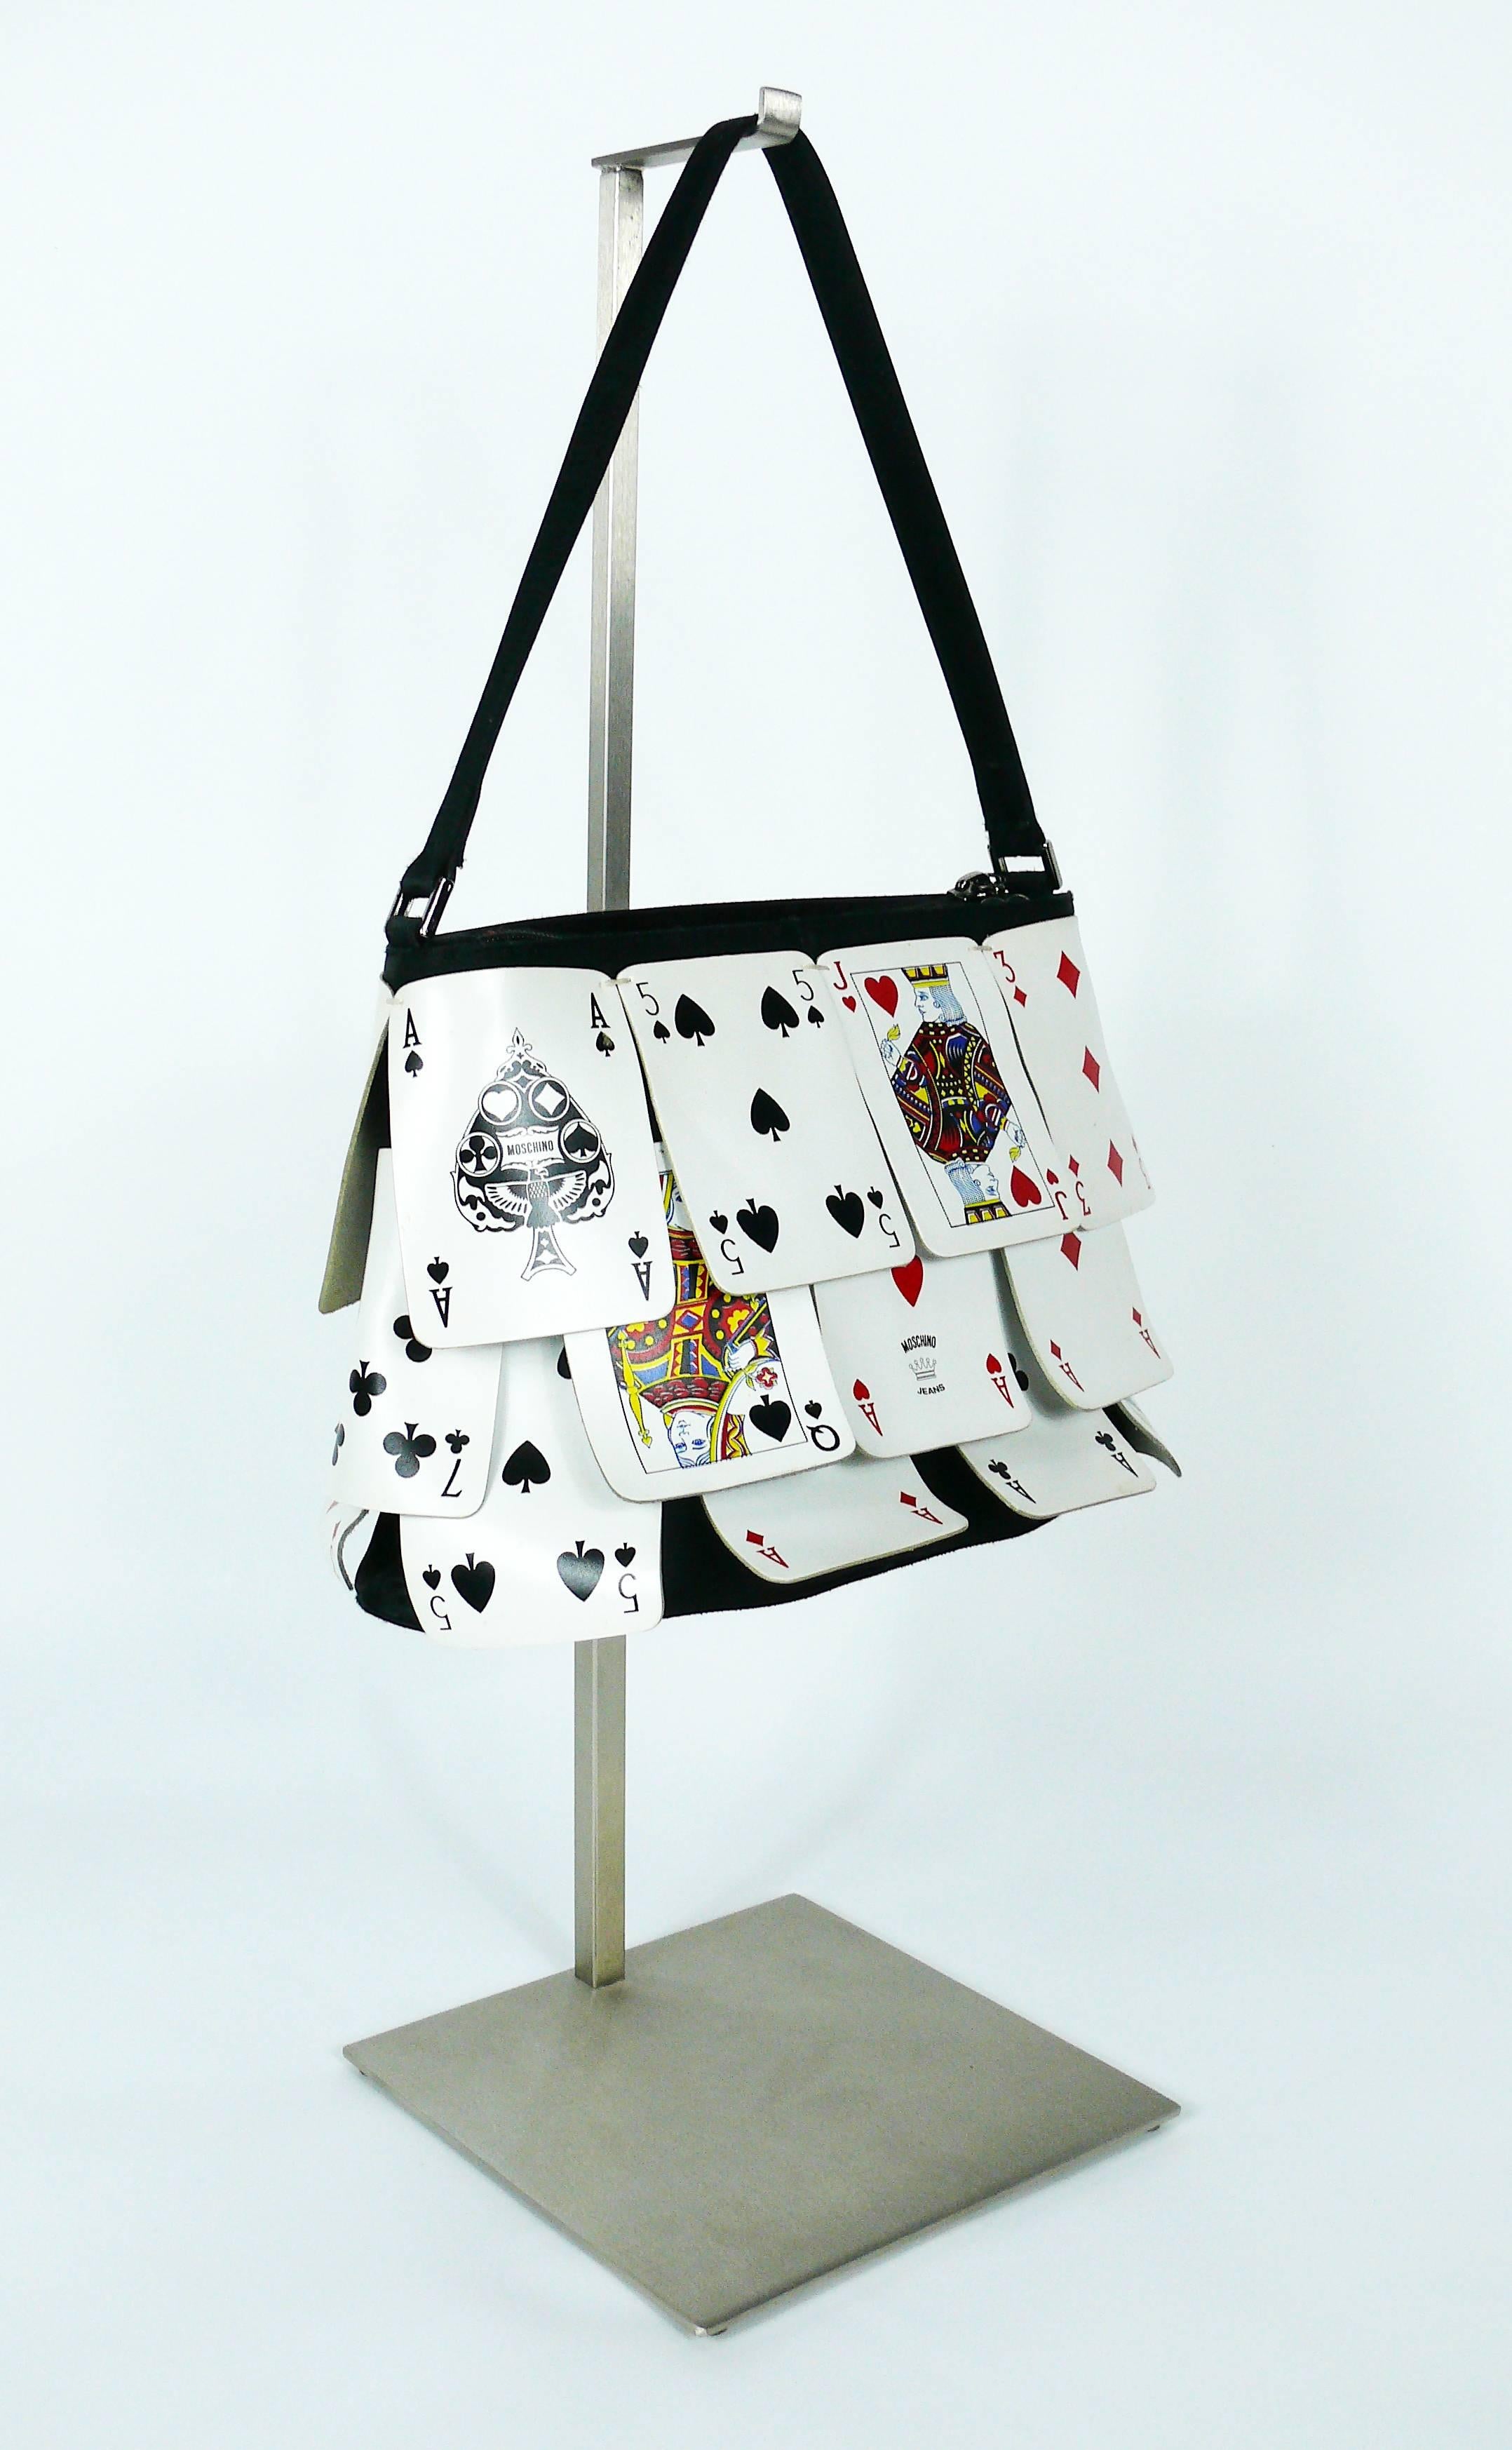 MOSCHINO vintage rare novelty playing cards bag.

This bag features :
- Black satin body overlaid with 24 playing cards.
- Red fabric lining.
- One inner zippered pocket.
- Zip closure.
- Top handle.
- Gun metal patina hardware.

Label reads :